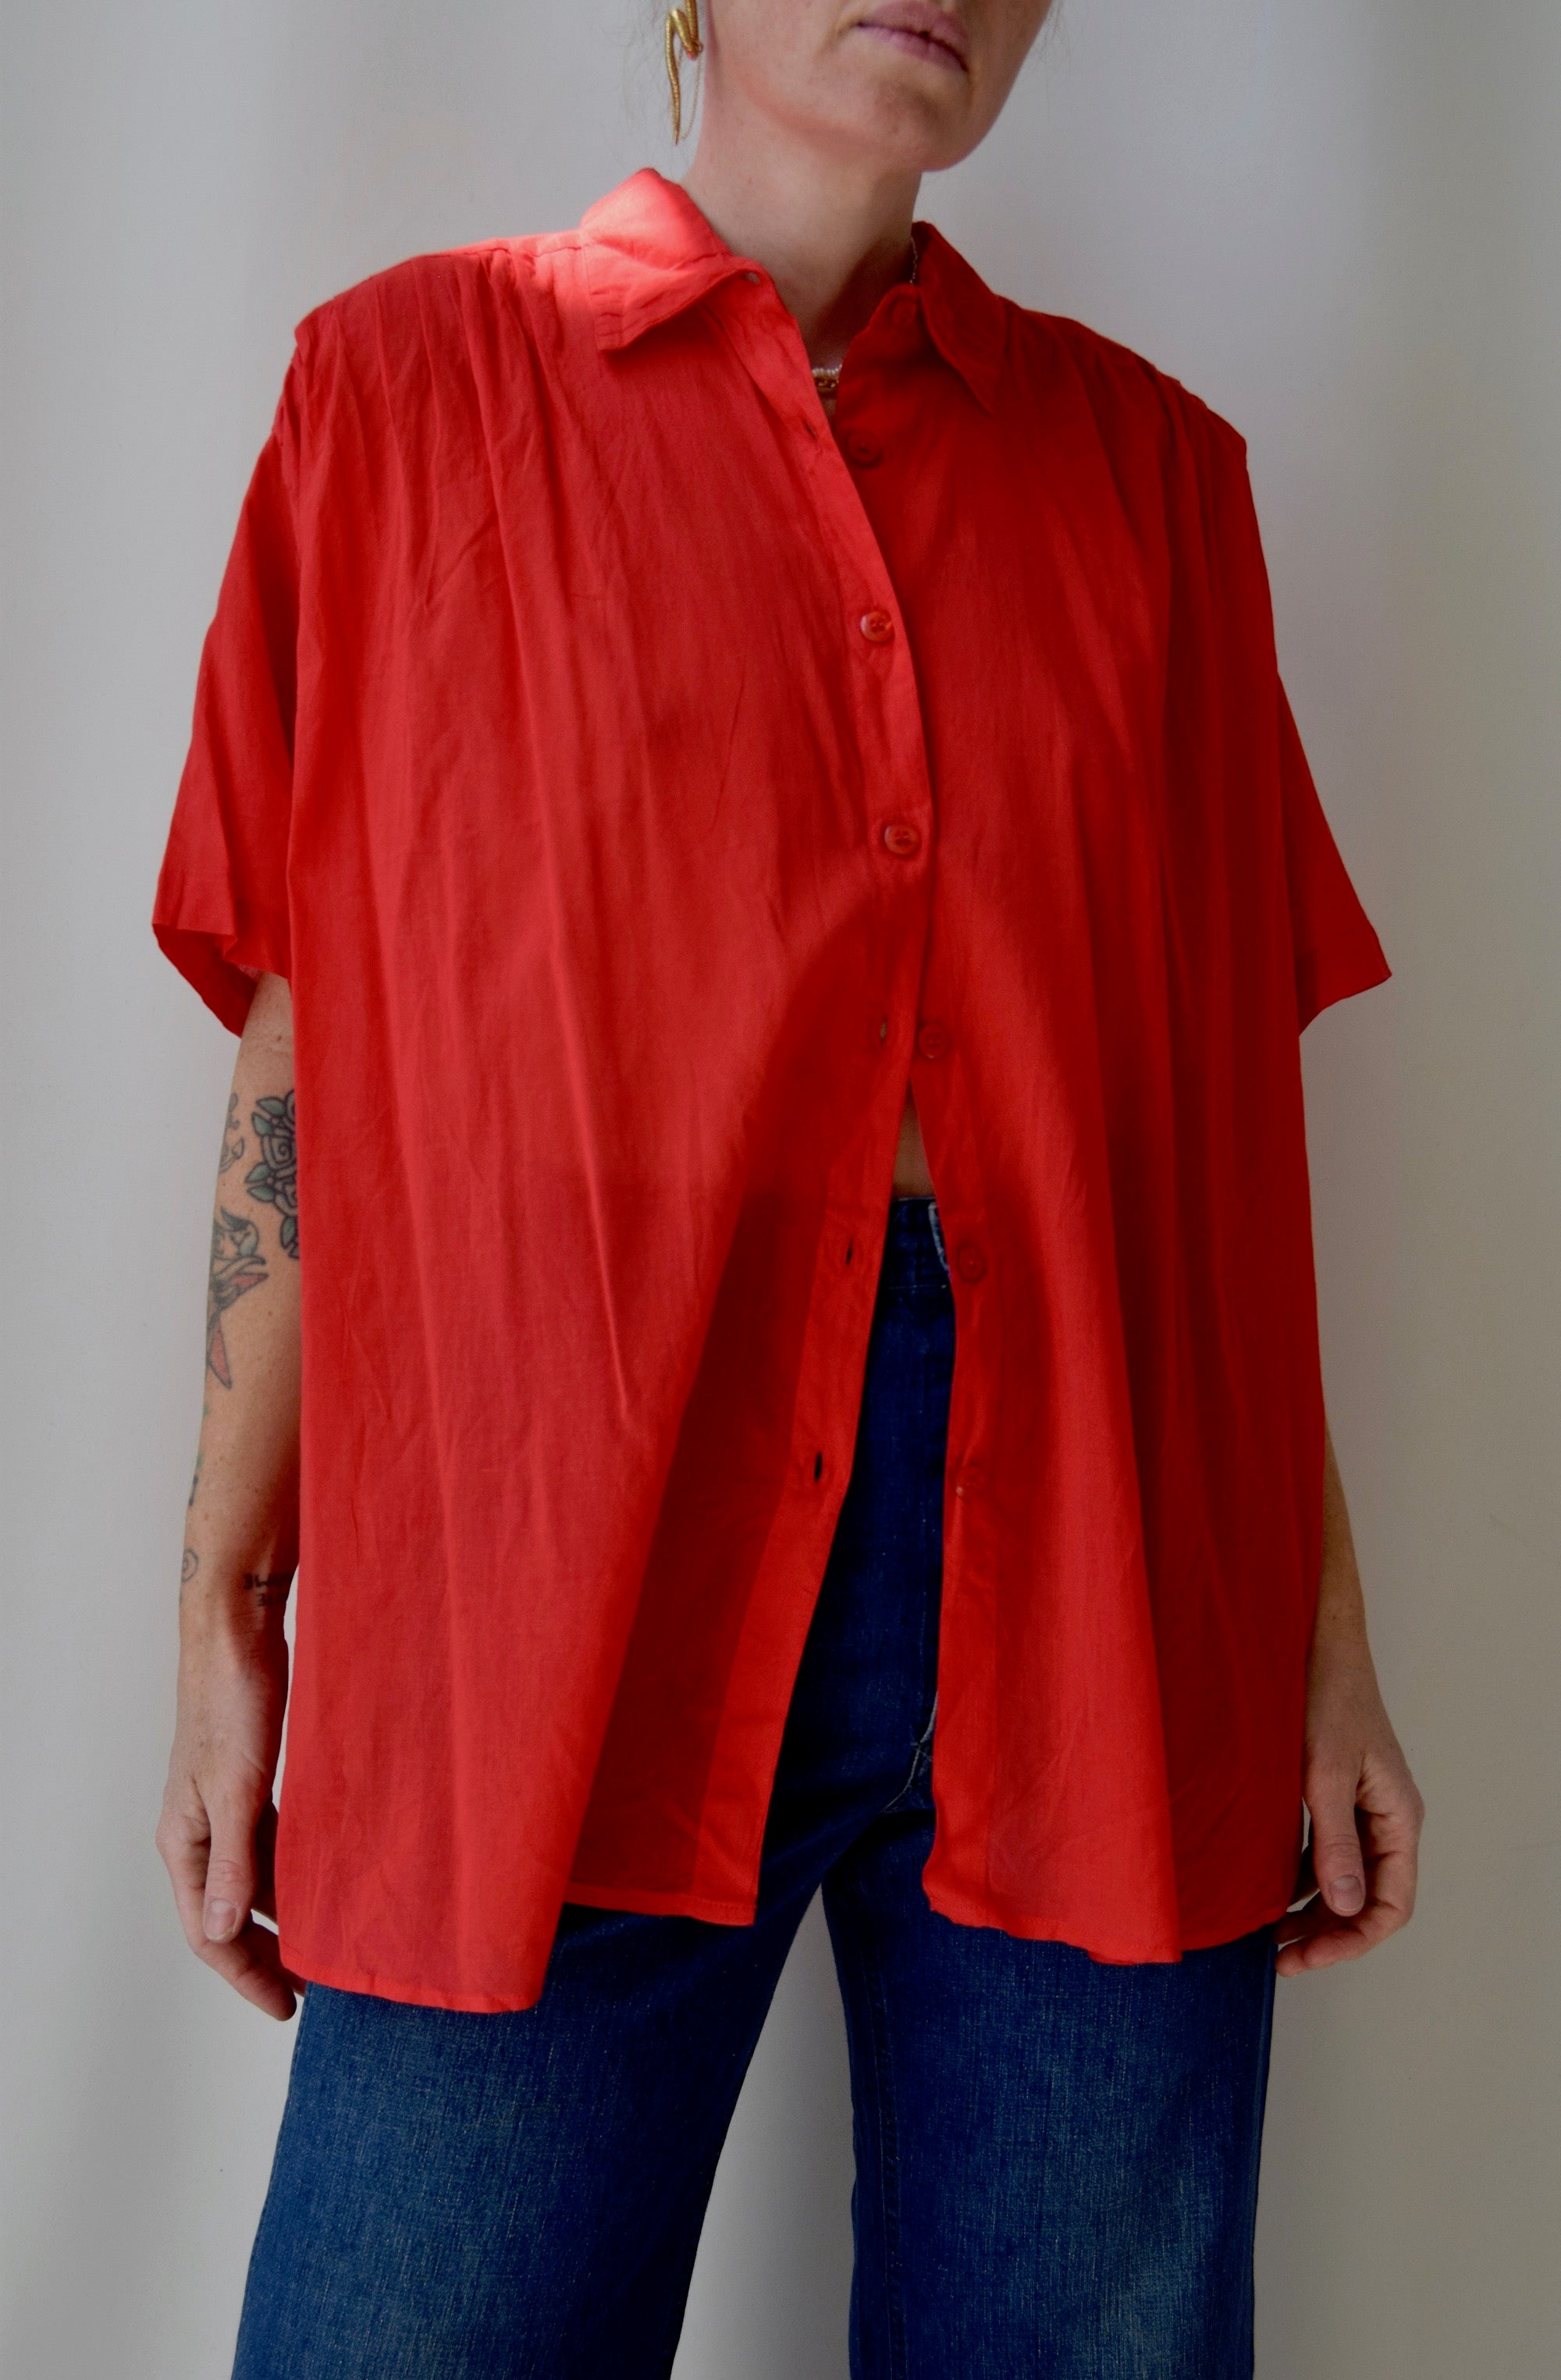 Ruby Indian Cotton Flowy Top